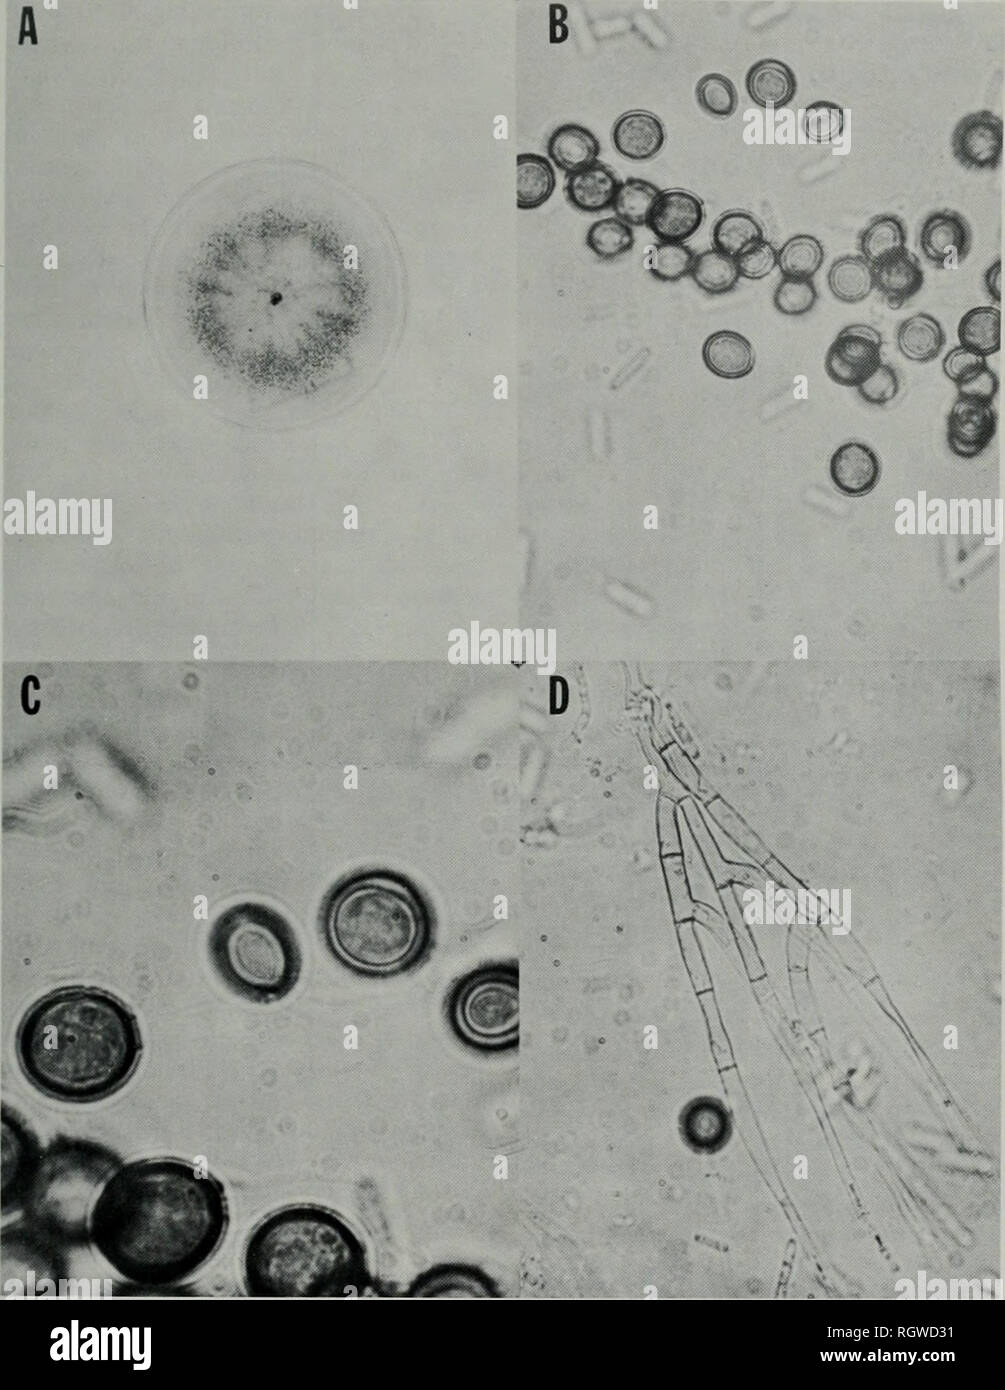 . Bulletin. Natural history; Natural history. Aug., 1971 Perry: Two Components of Poinsettia Root Rot 431 A B. Fig. 2. — Chahropsis thielavioides: A, 10-day-old colony on V-8 juice agar; B, components of a typical colony (X 520); C, chlamydospores |X 1235); D, endoconidiophores with endoconidio |X 520). ducing terminal cell varied from 11.7 to 27.3 fi in length. The tapered phialides produced endoconidia singly. Although several endoconidia in various stages of formation were seen within a terminal cell, the mature endoconidia were ex- truded from the apex individually. A stubby side branch oc Stock Photo